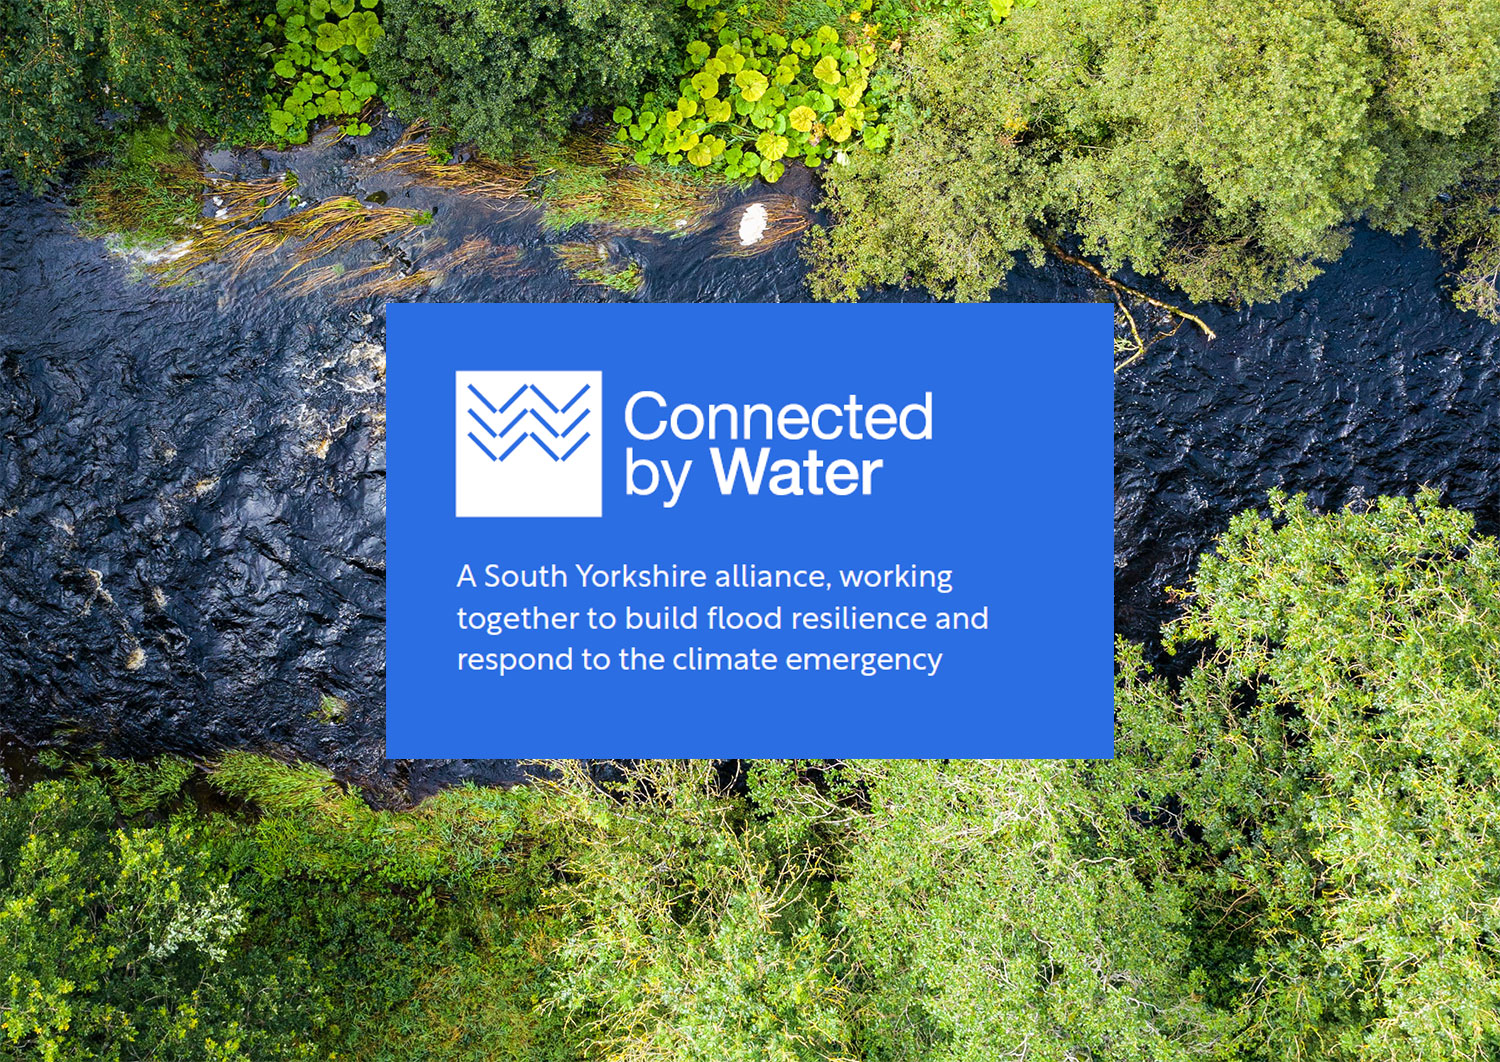 Trees and river with text on top. Text reads "Connected by Water. A South Yorkshire alliance, working together to build flood resilience and respond to the climate emergency." 